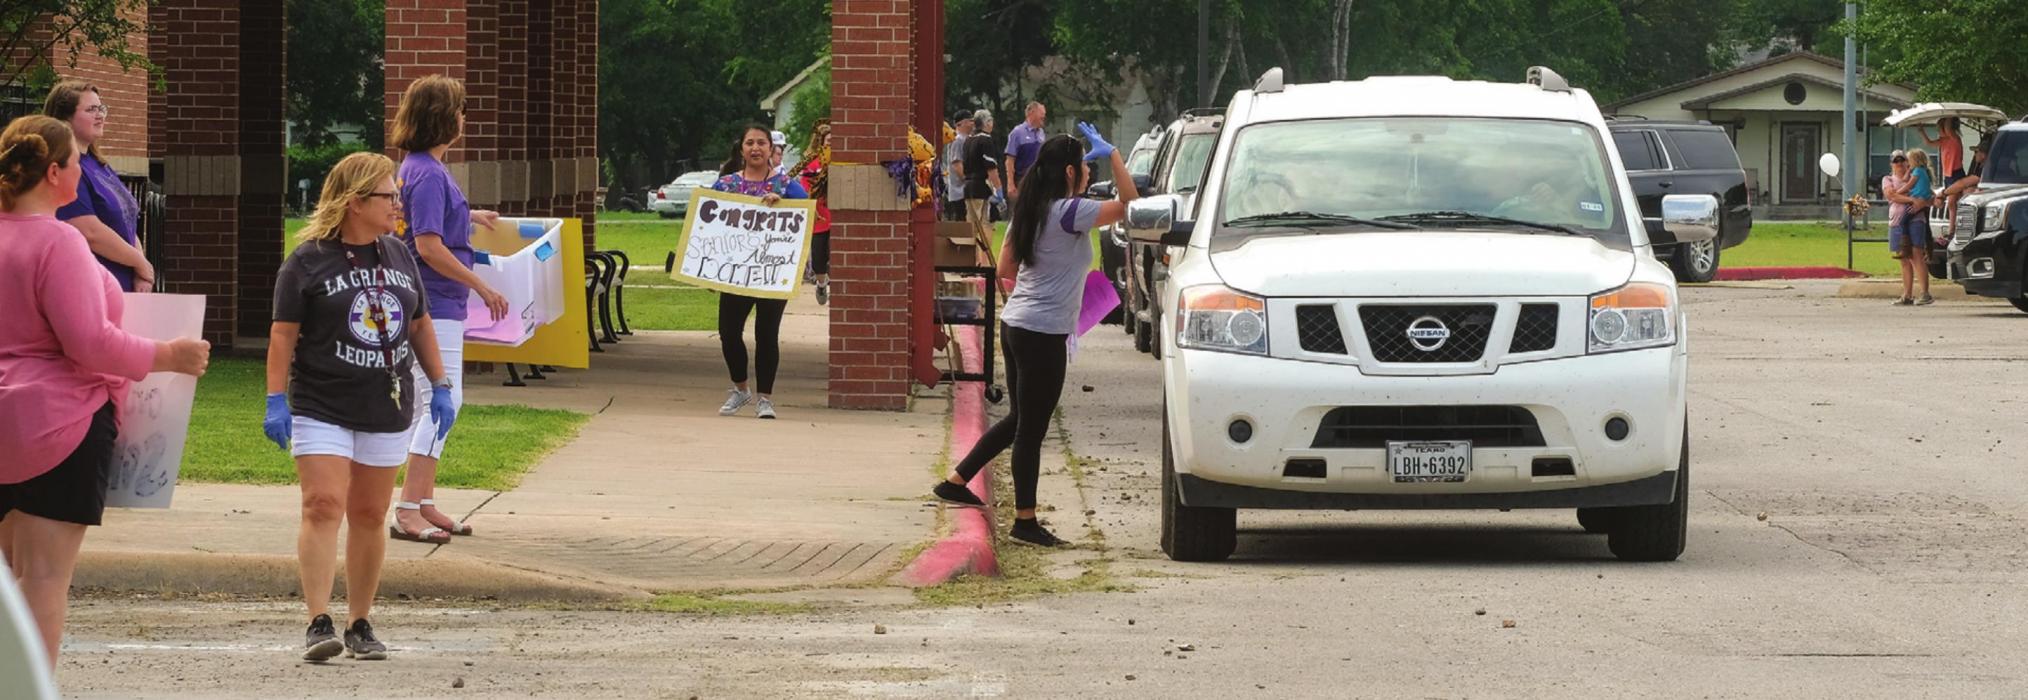 Seniors at La Grange High School picked up their graduation caps and gowns in a drive-through at the school Tuesday, May 5. For most of the students, it was their first visit to campus since spring break, when the school closed for the coronavirus. At the drive-through on Tuesday, teachers and school staff held up motivational signs for the soon-to-be graduates. La Grange ISD has not yet announced plans for a graduation ceremony. Seniors were told to expect a ceremony date in June. Photo by Andy Behlen